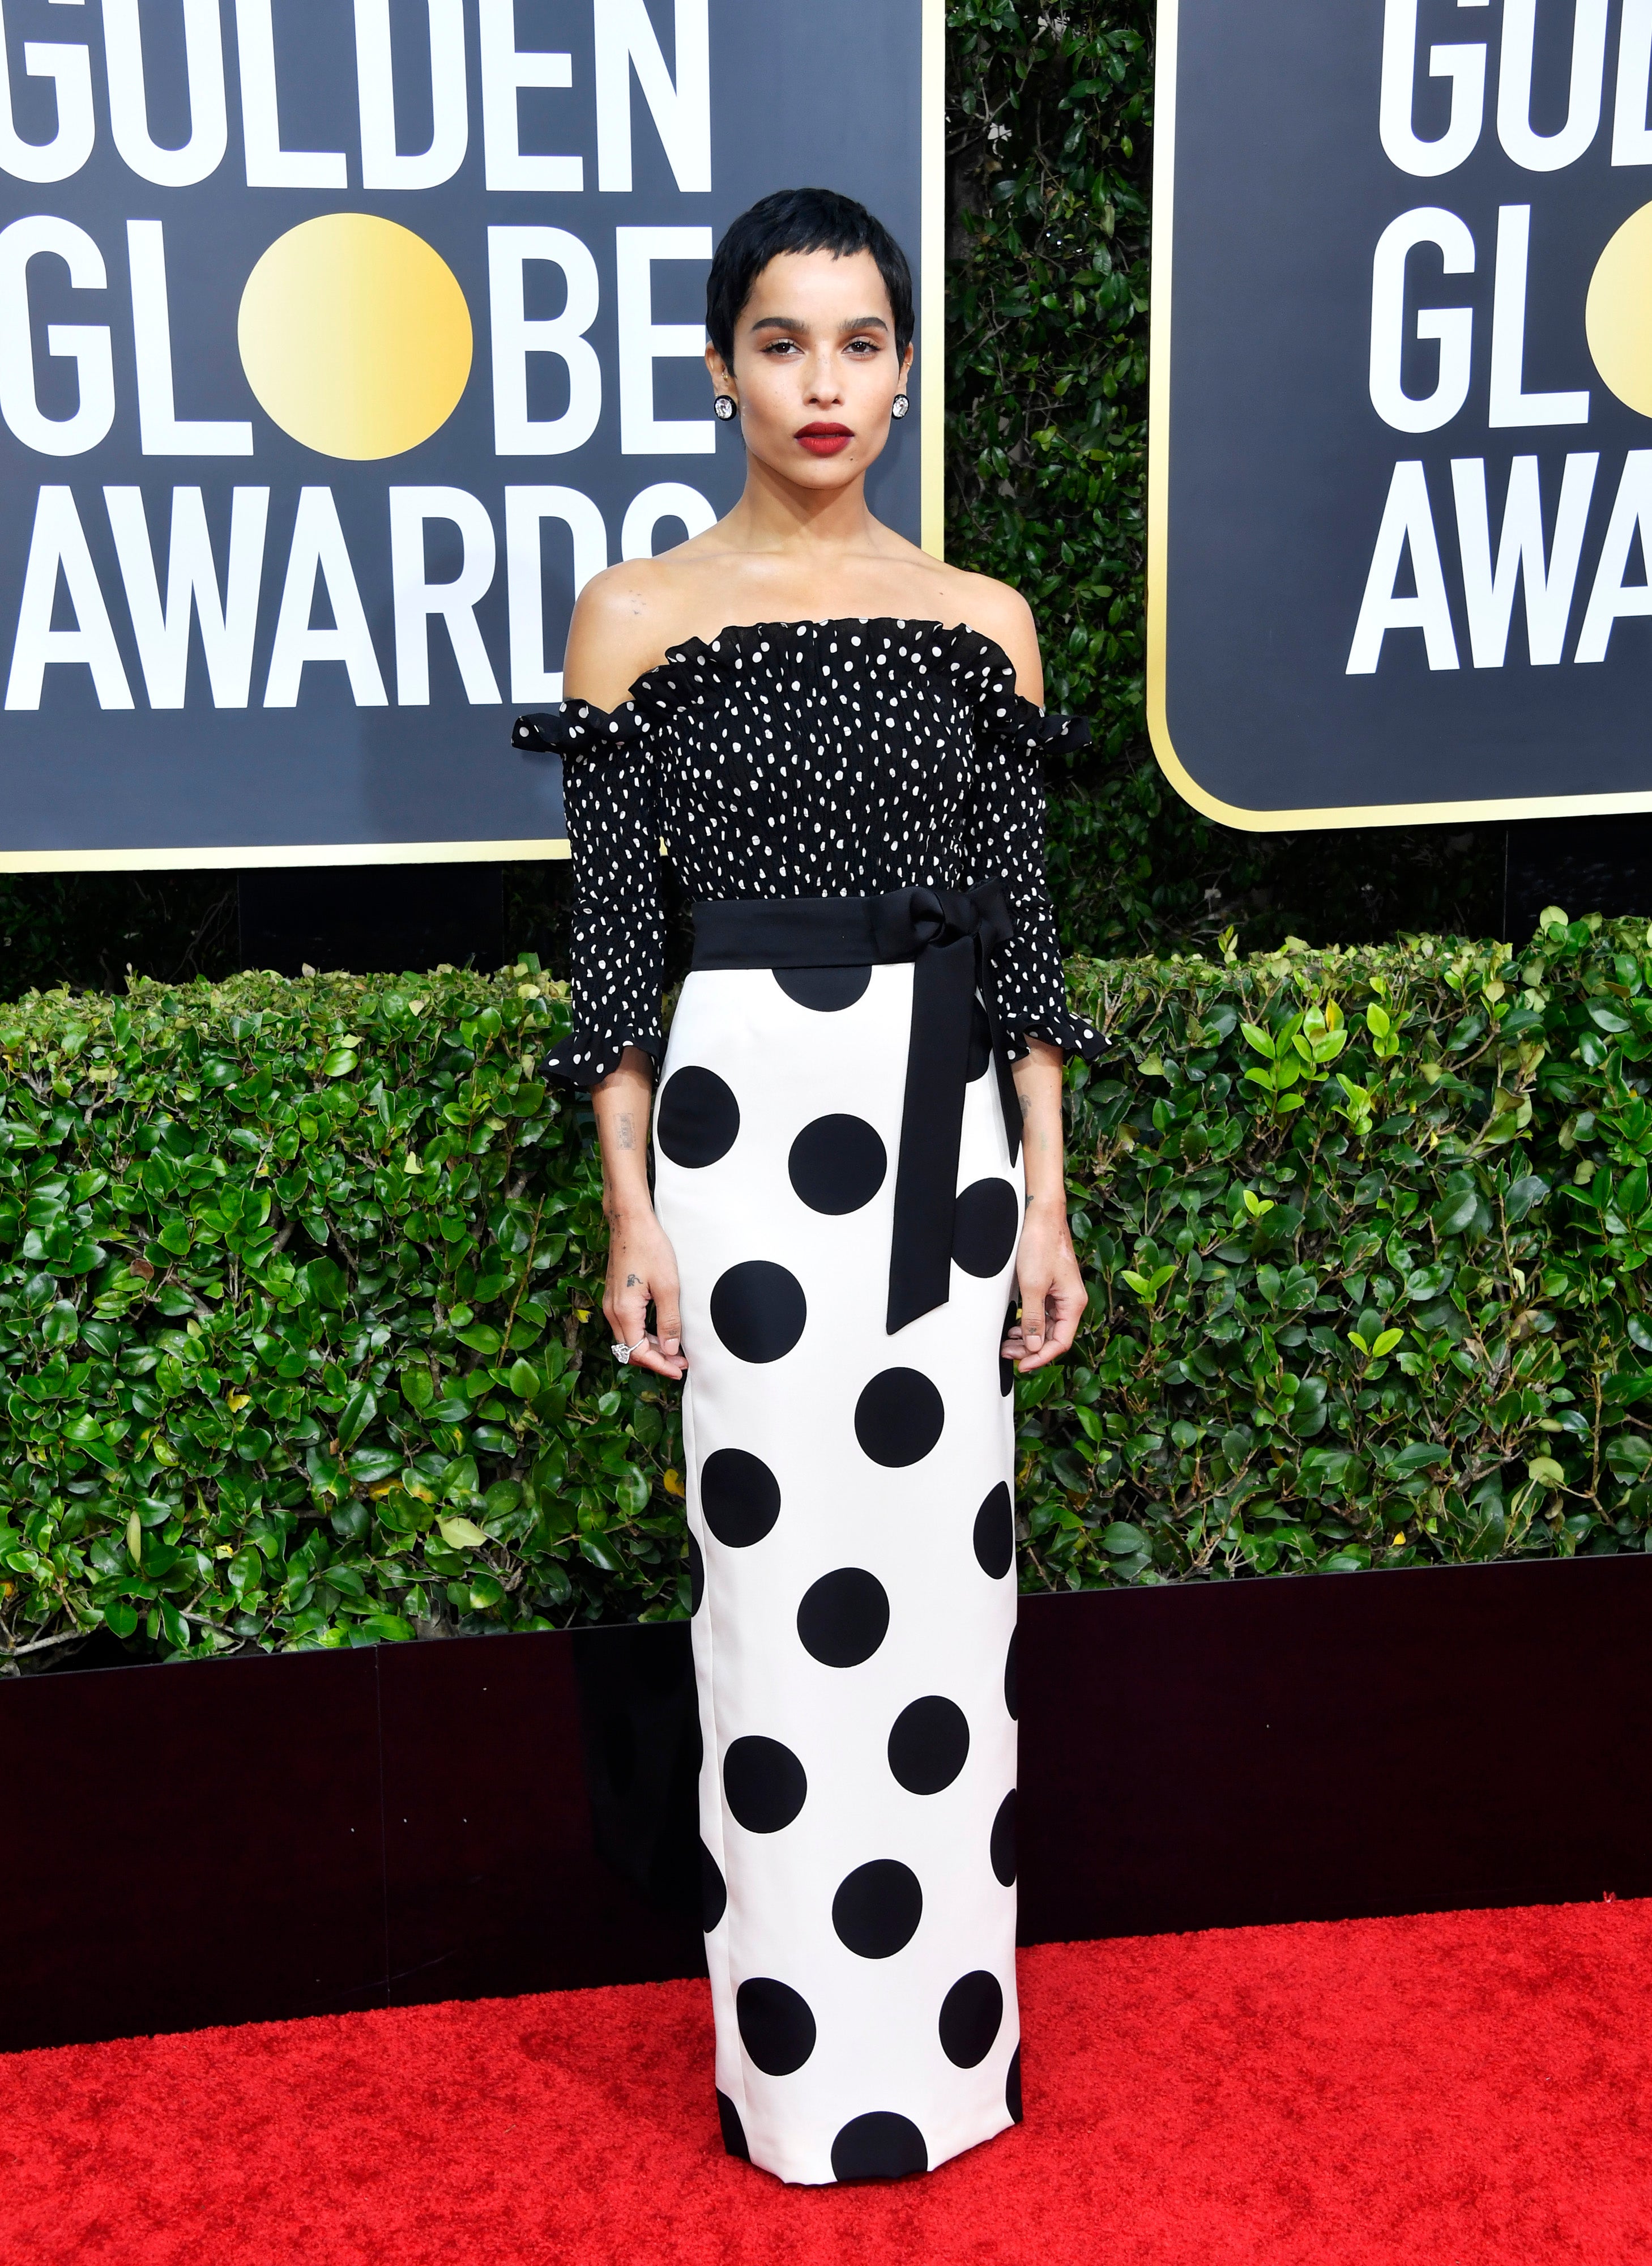 The Biggest Trends from This Year’s Golden Globe Awards